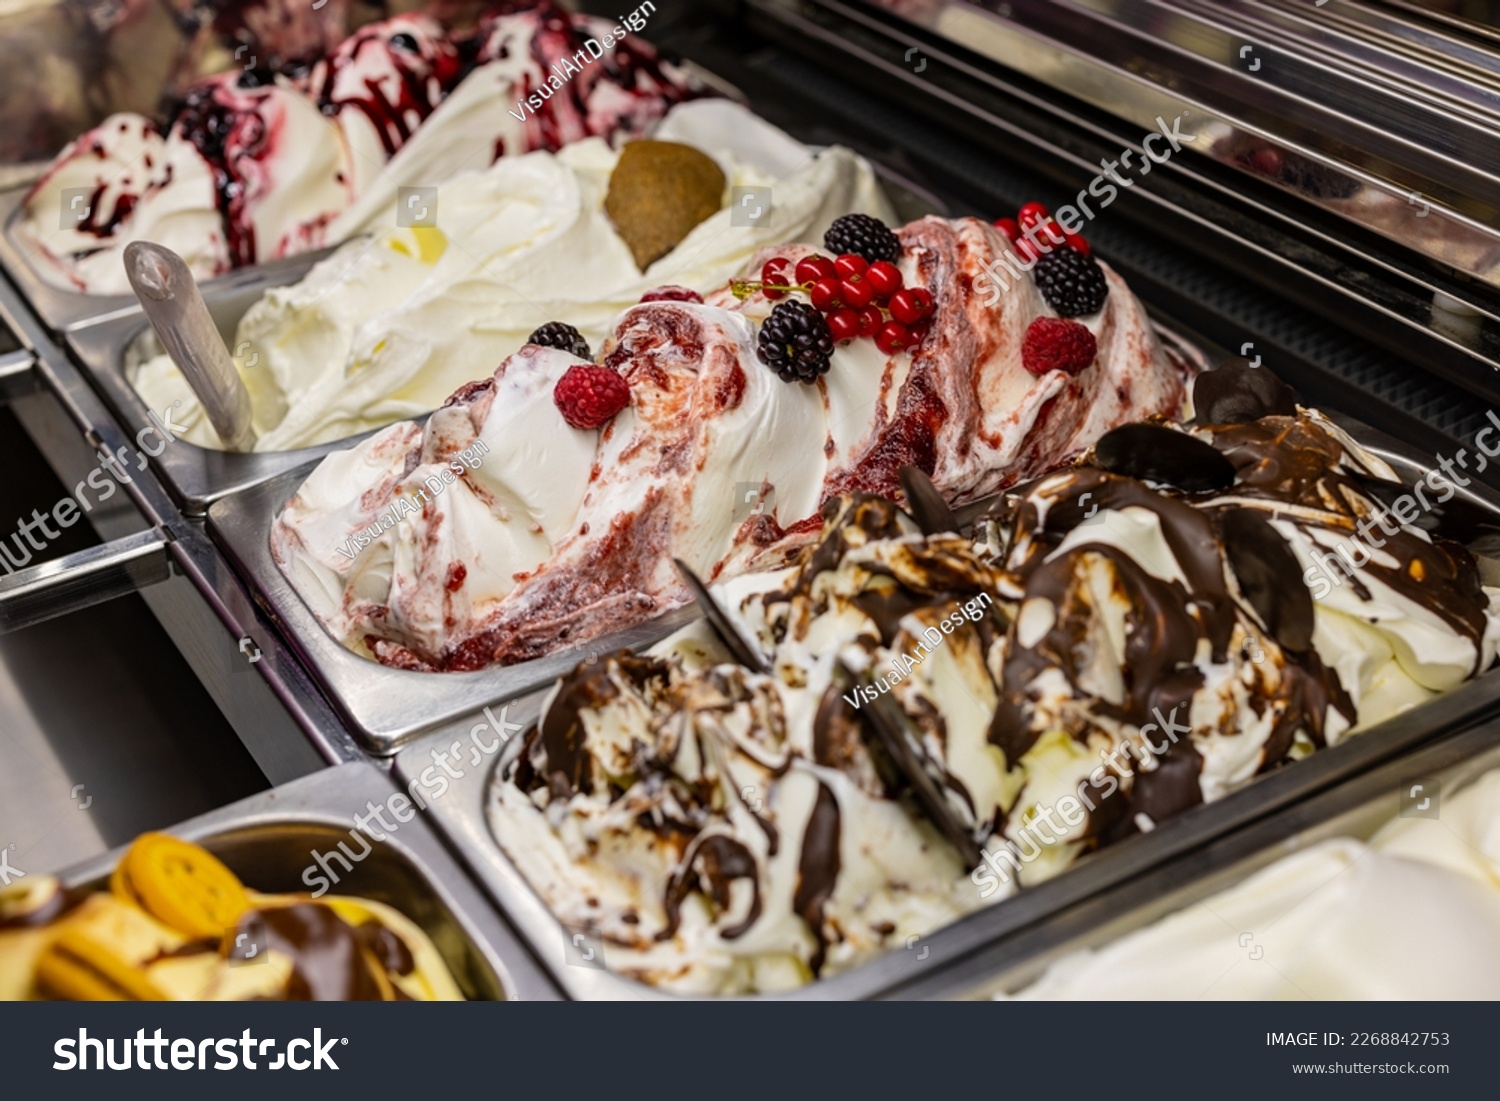 Tubs of ice cream of various flavors photographed in an ice cream parlor ready to be sold #2268842753